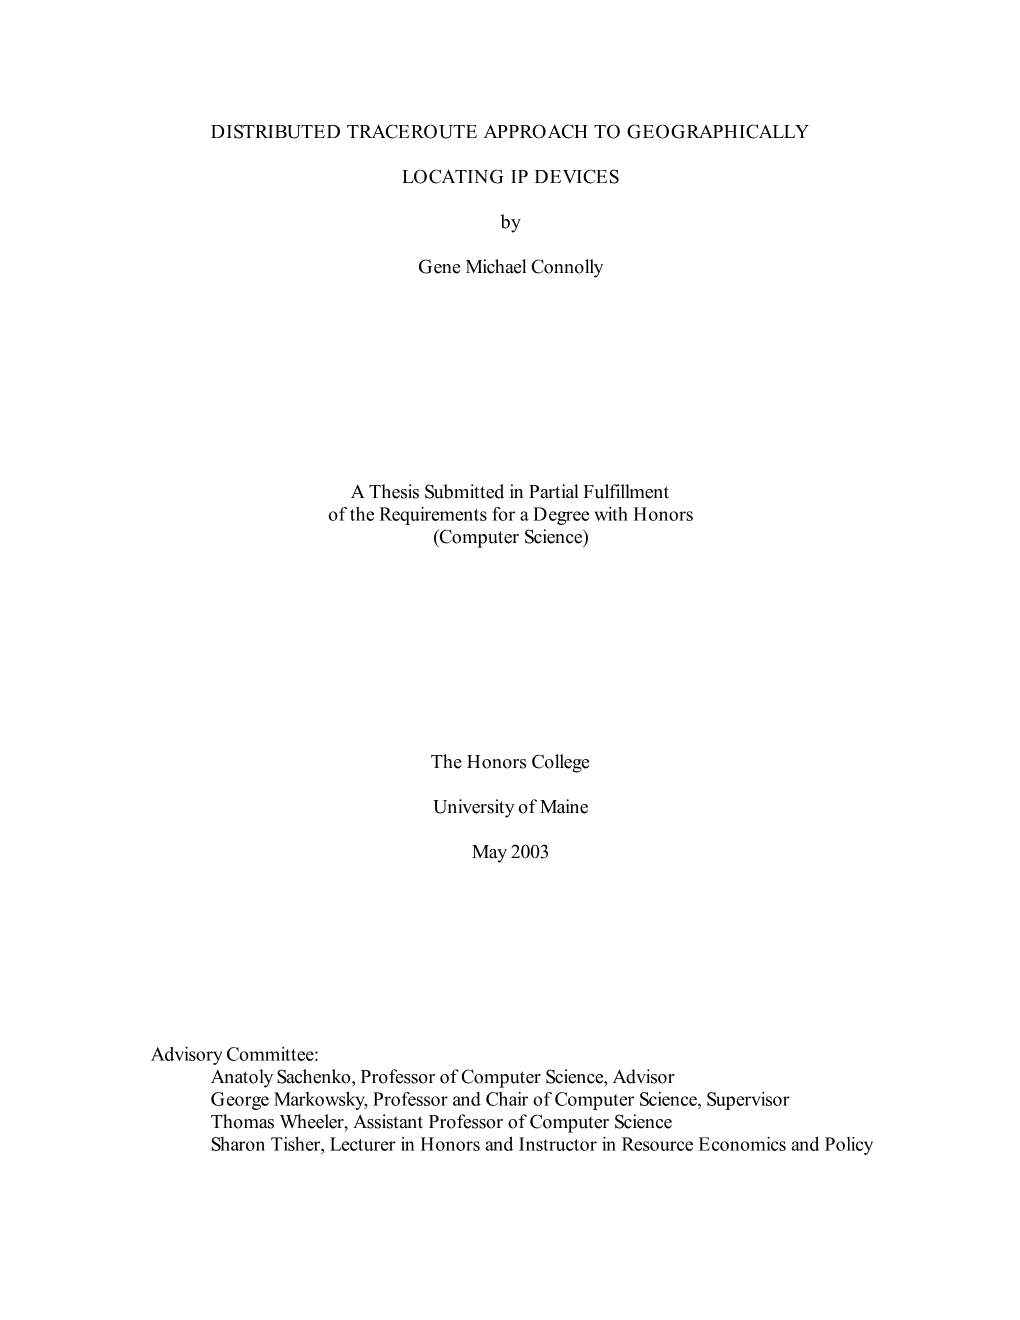 DISTRIBUTED TRACEROUTE APPROACH to GEOGRAPHICALLY LOCATING IP DEVICES by Gene Michael Connolly a Thesis Submitted in Partial